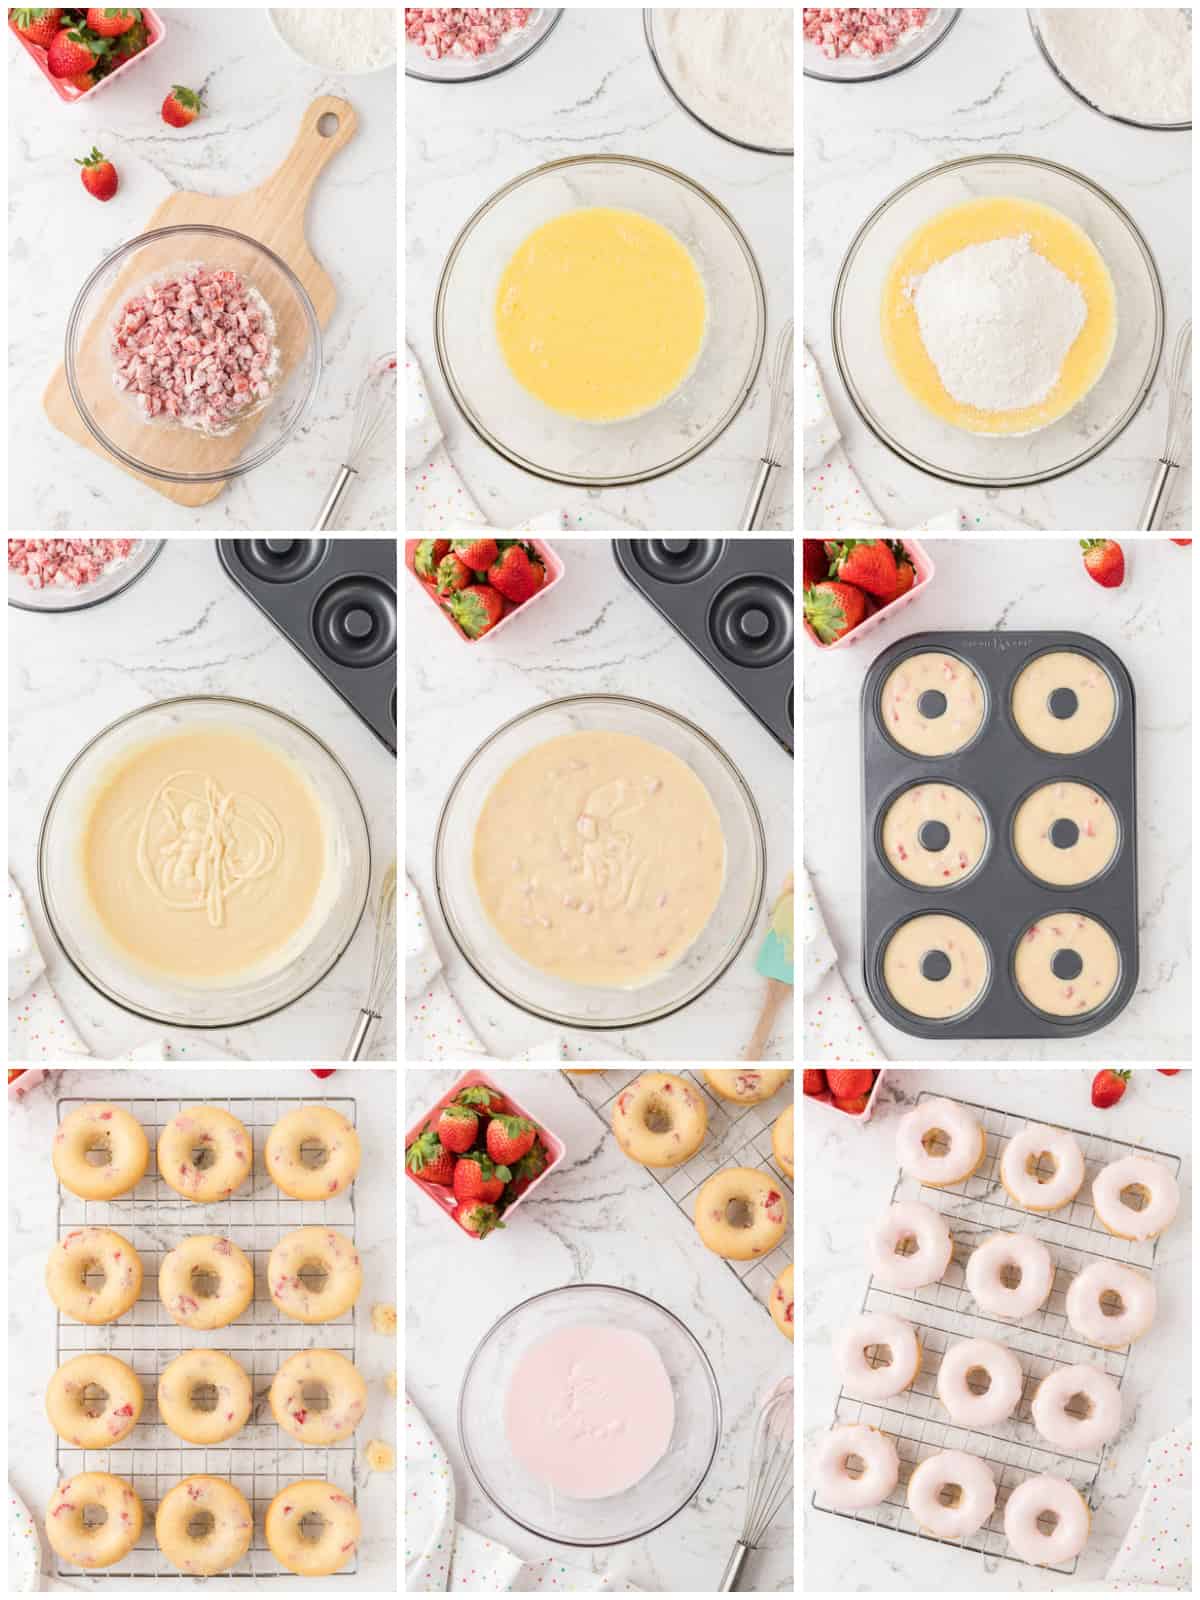 Step by step photos on how to make Strawberry Donuts.